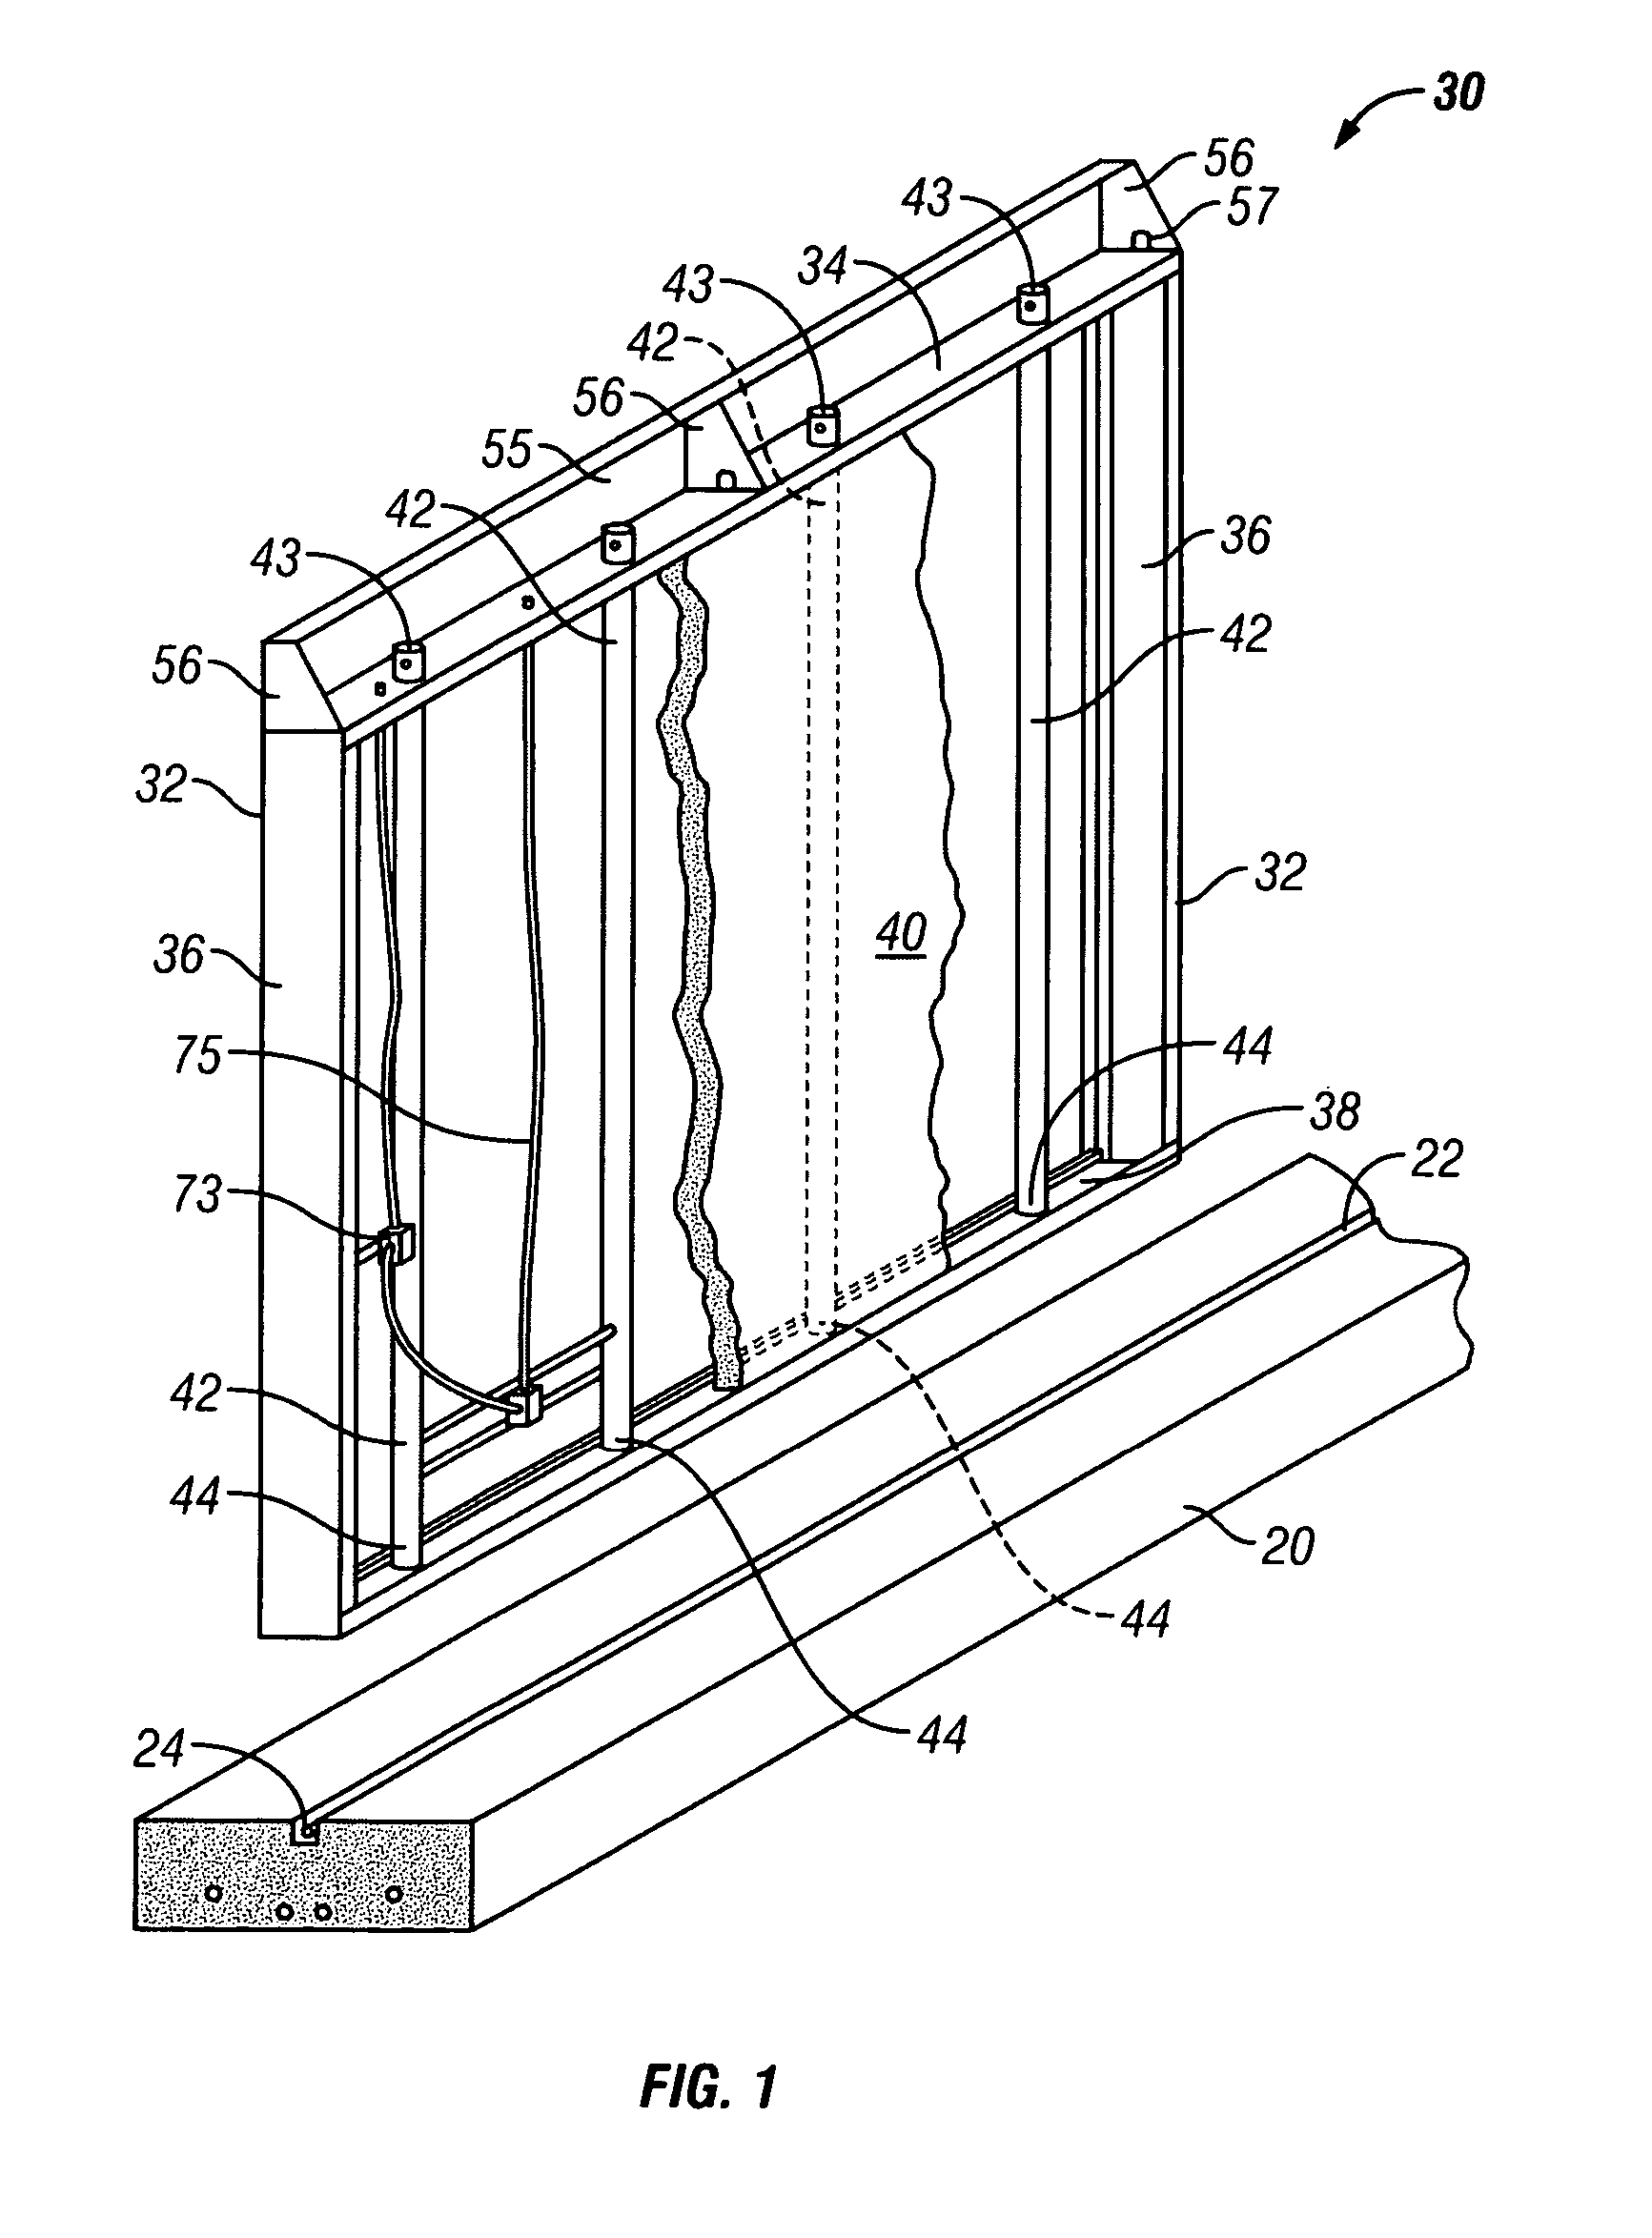 System and method of foamed cementitious construction